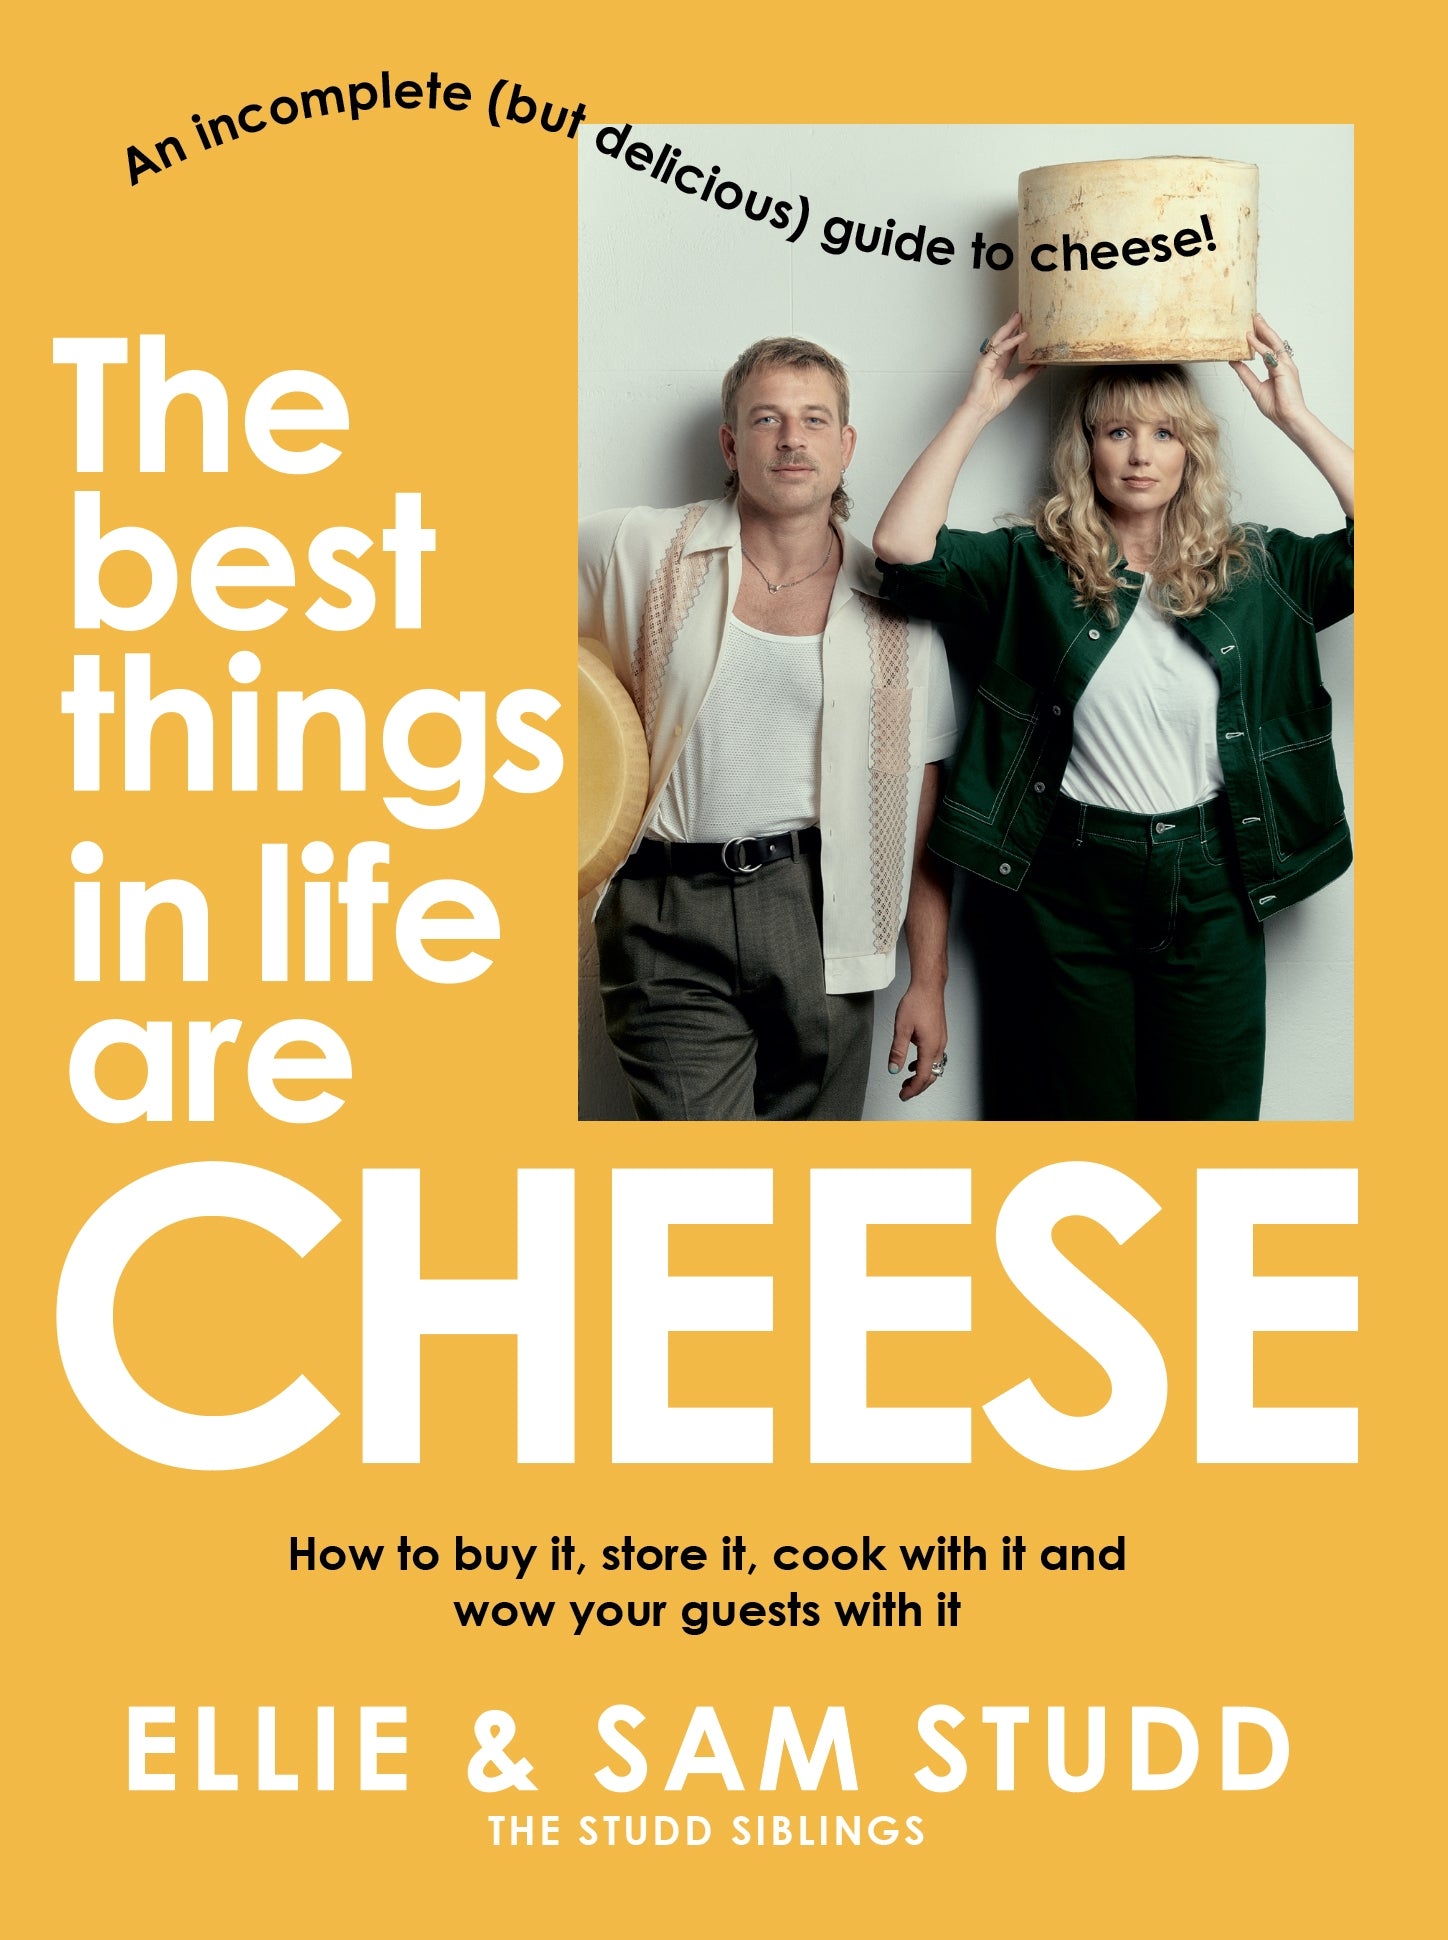 BEST THINGS IN LIFE ARE CHEESE